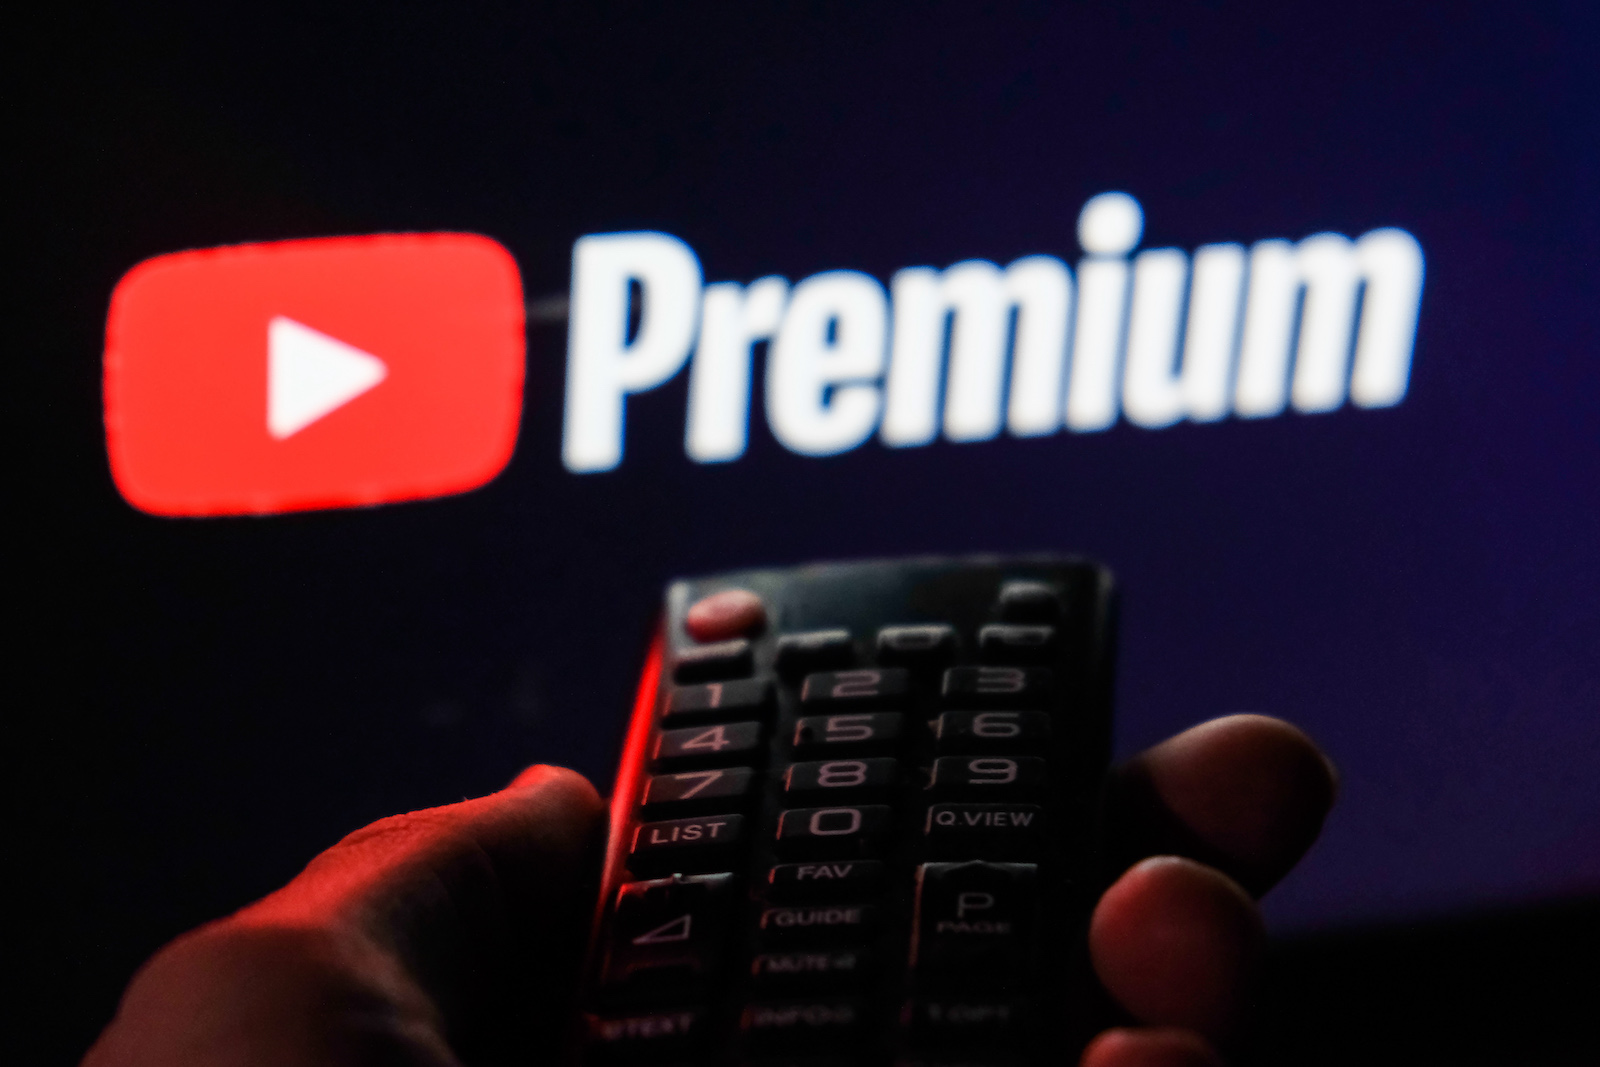 TV remote control is seen with YouTube Premium logo displayed on a screen in this illustration photo taken in Krakow, Poland on February 6, 2022. (Photo by Jakub Porzycki/NurPhoto via Getty Images)